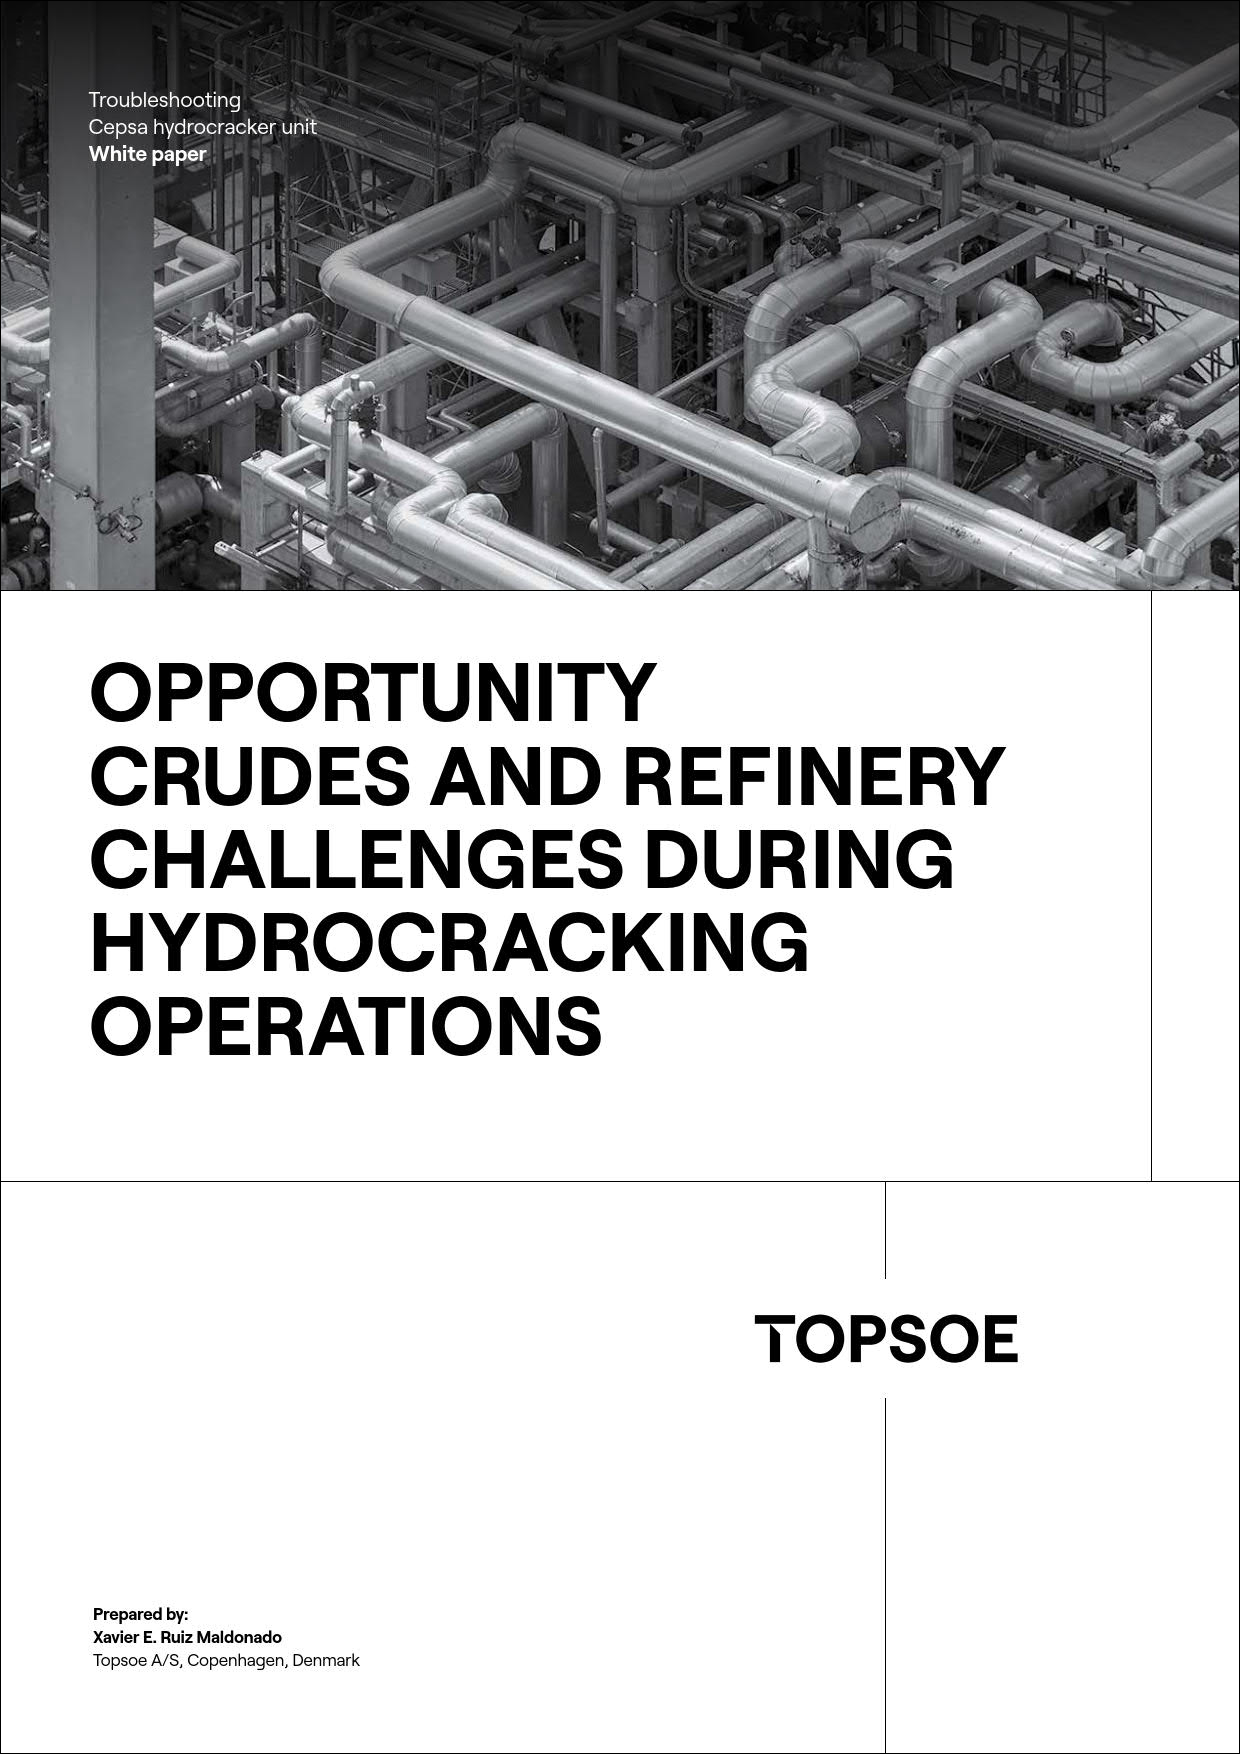 Opportunity crudes and refinery challenges during hydrocracking operations